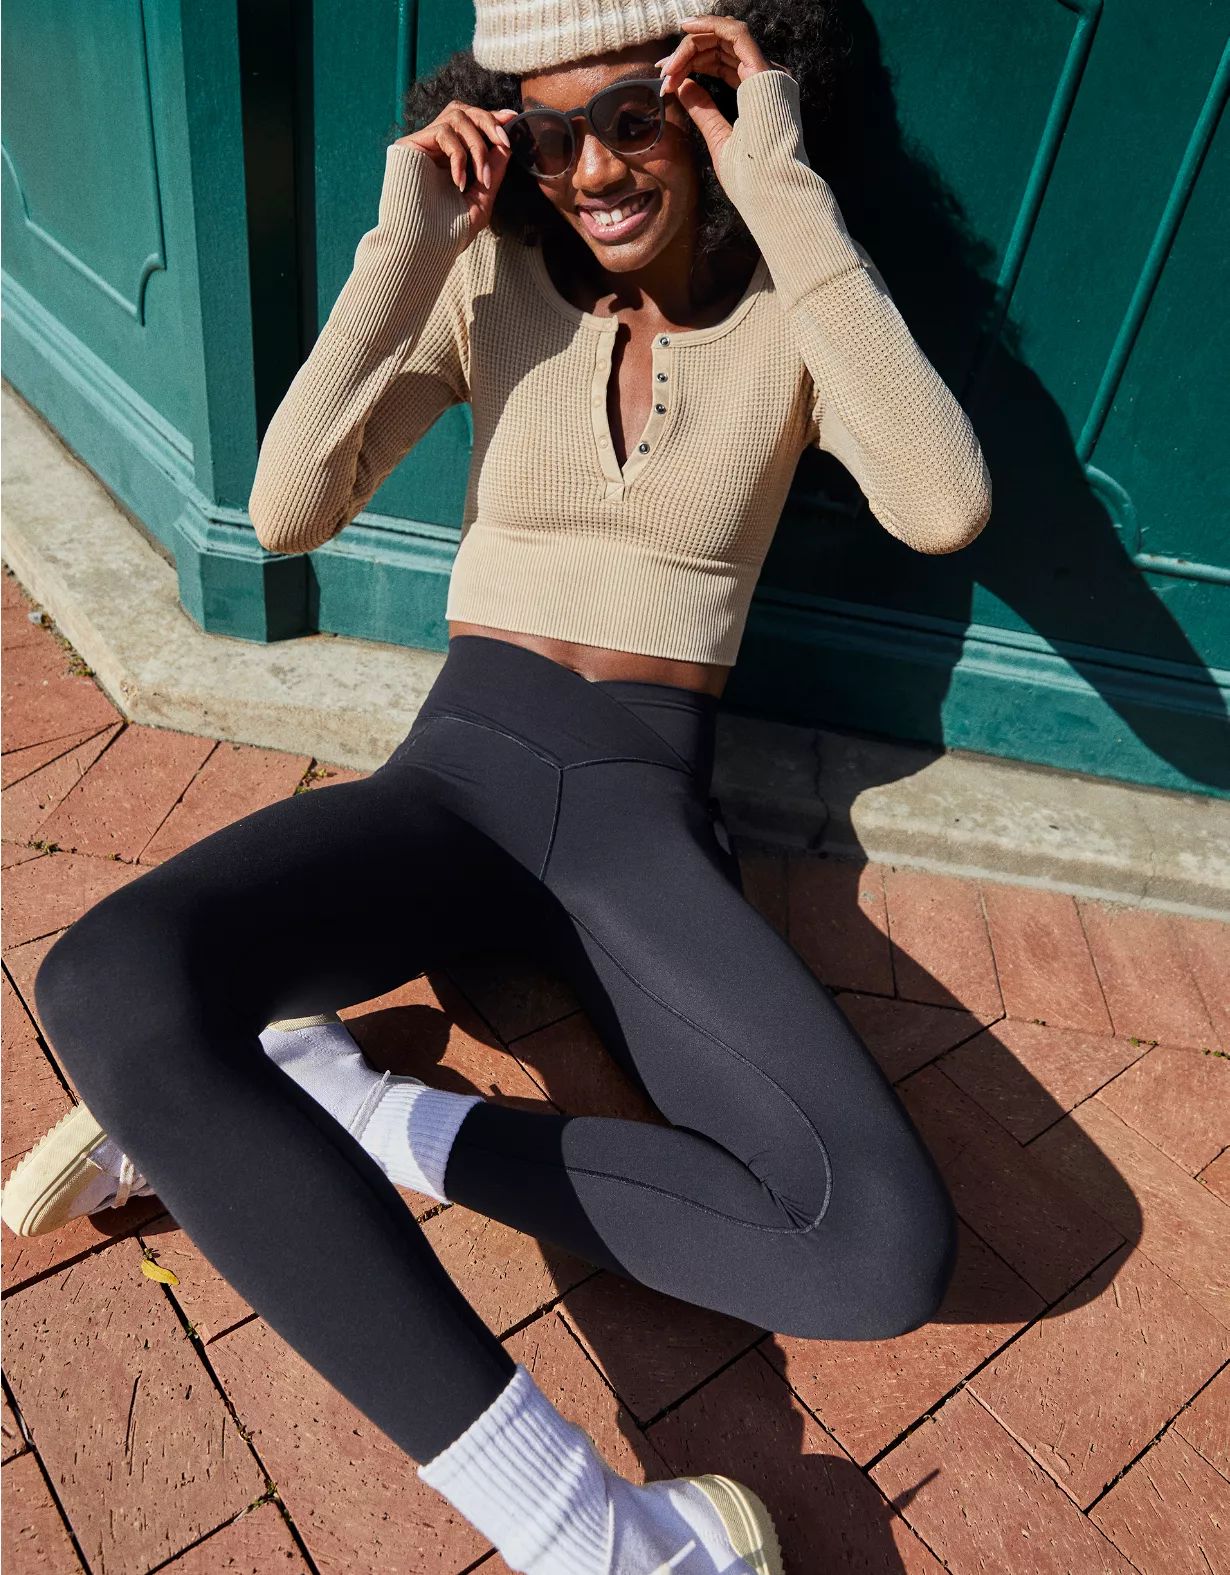 OFFLINE By Aerie Real Me Xtra Crossover High Waisted Pocket Legging | American Eagle Outfitters (US & CA)